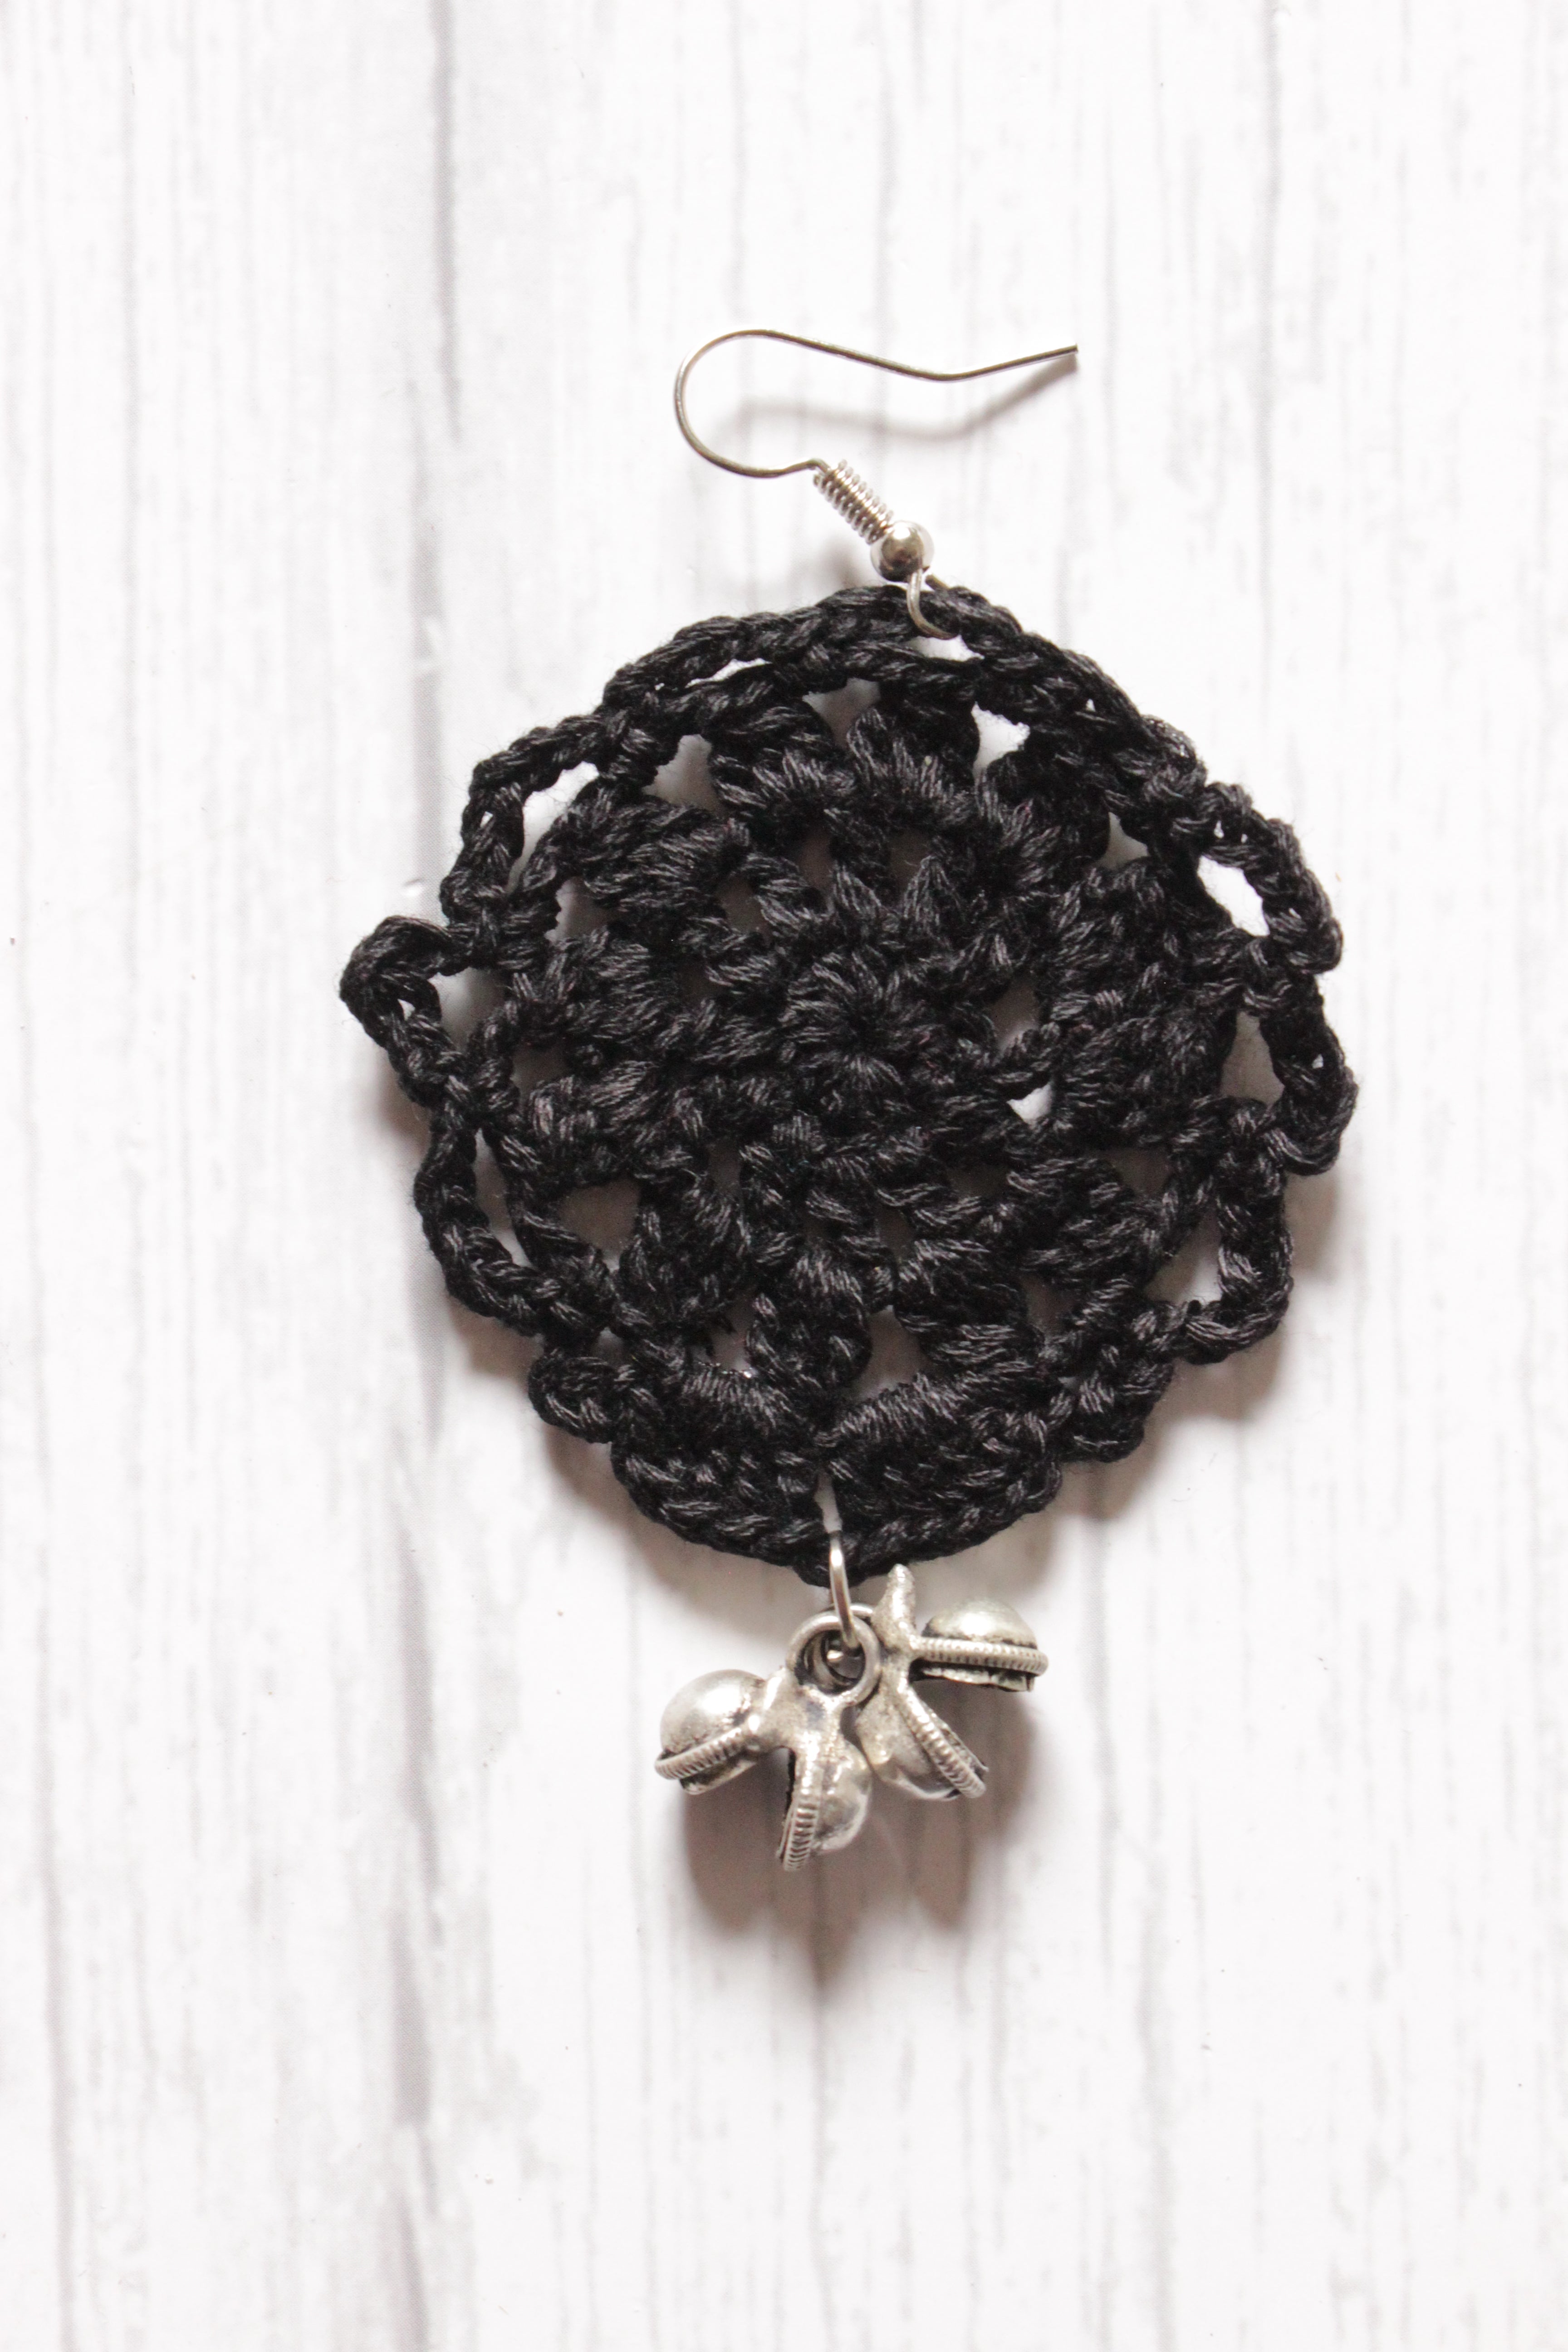 Black Jaali Pattern Handcrafted Crochet Earrings Embellished with Ghungroo Beads